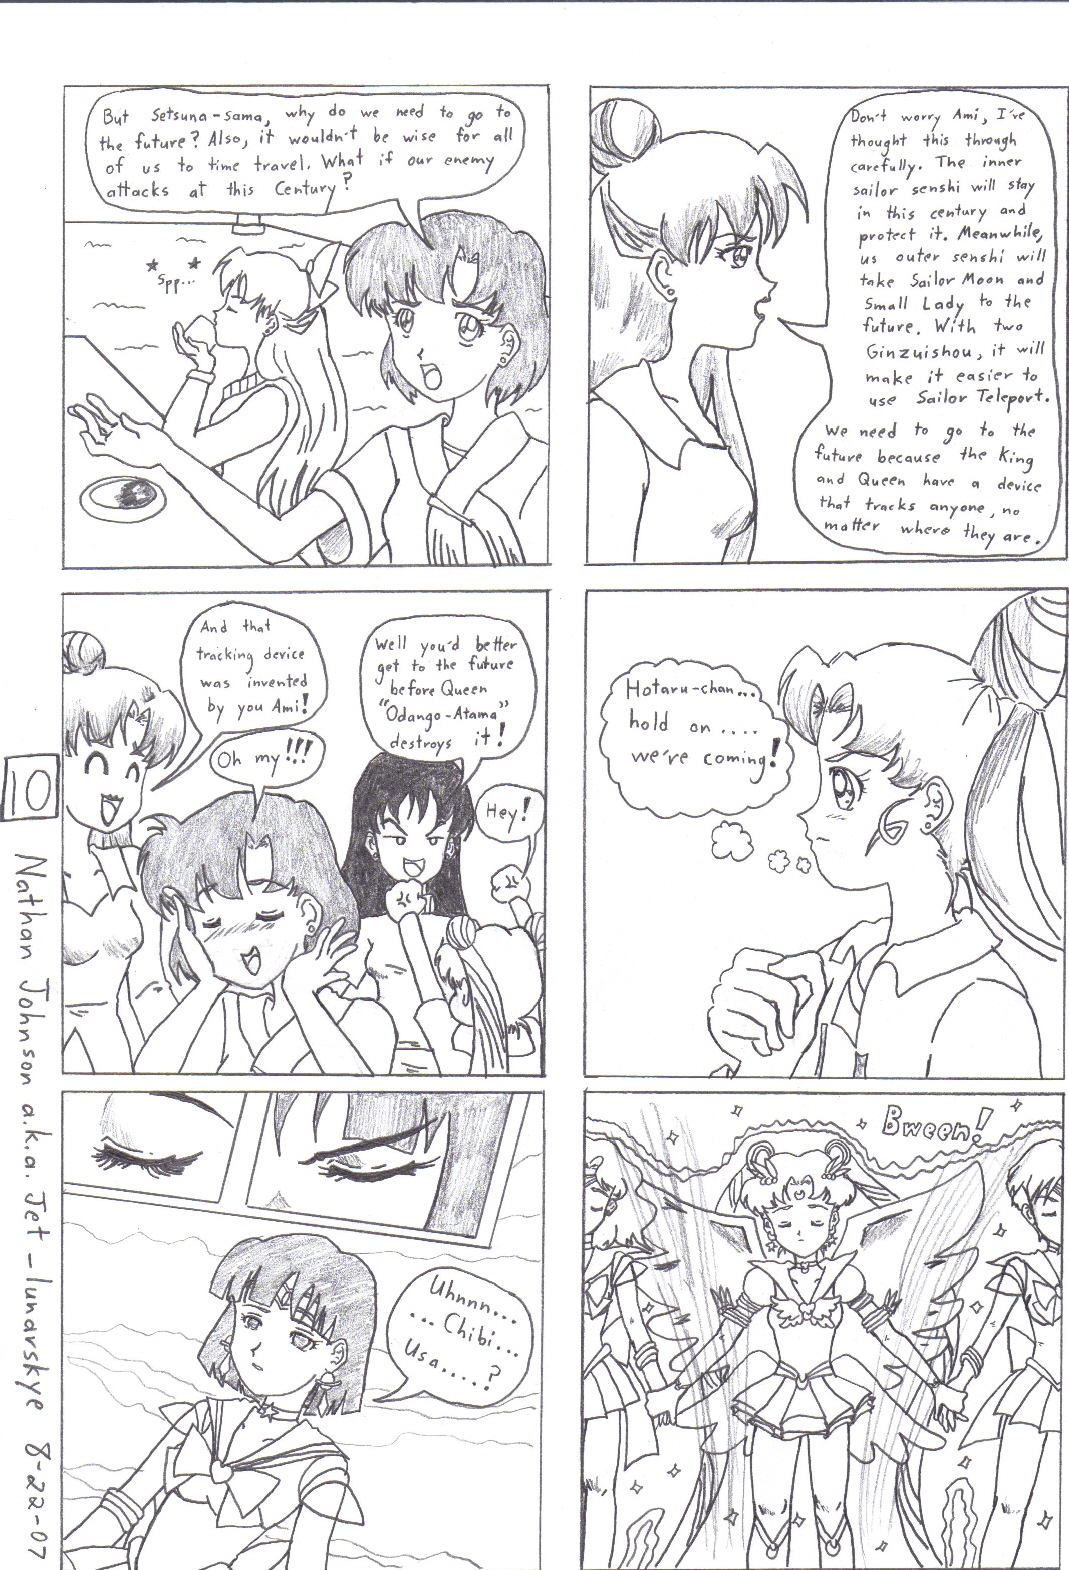 Sailor Moon Stars: The Nightmare Soldier Page 10 by Jet_lunarskye